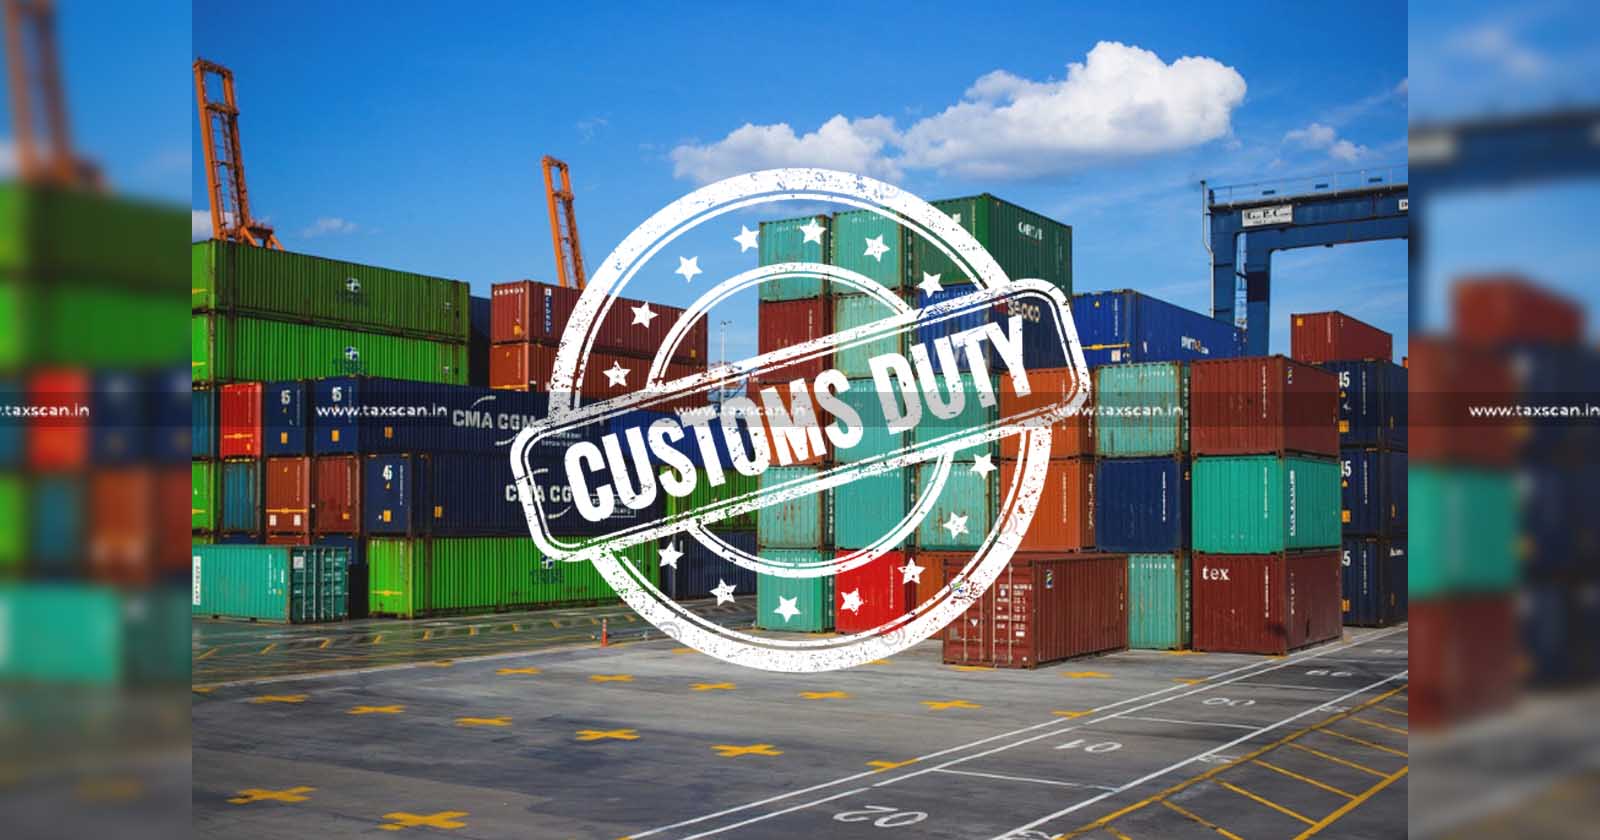 Adjudication Order Passed without Allowing Cross-Examination - Violation of Natural Justice - CESTAT quashes Customs Duty Demand - CESTAT - Customs Duty - Taxscan